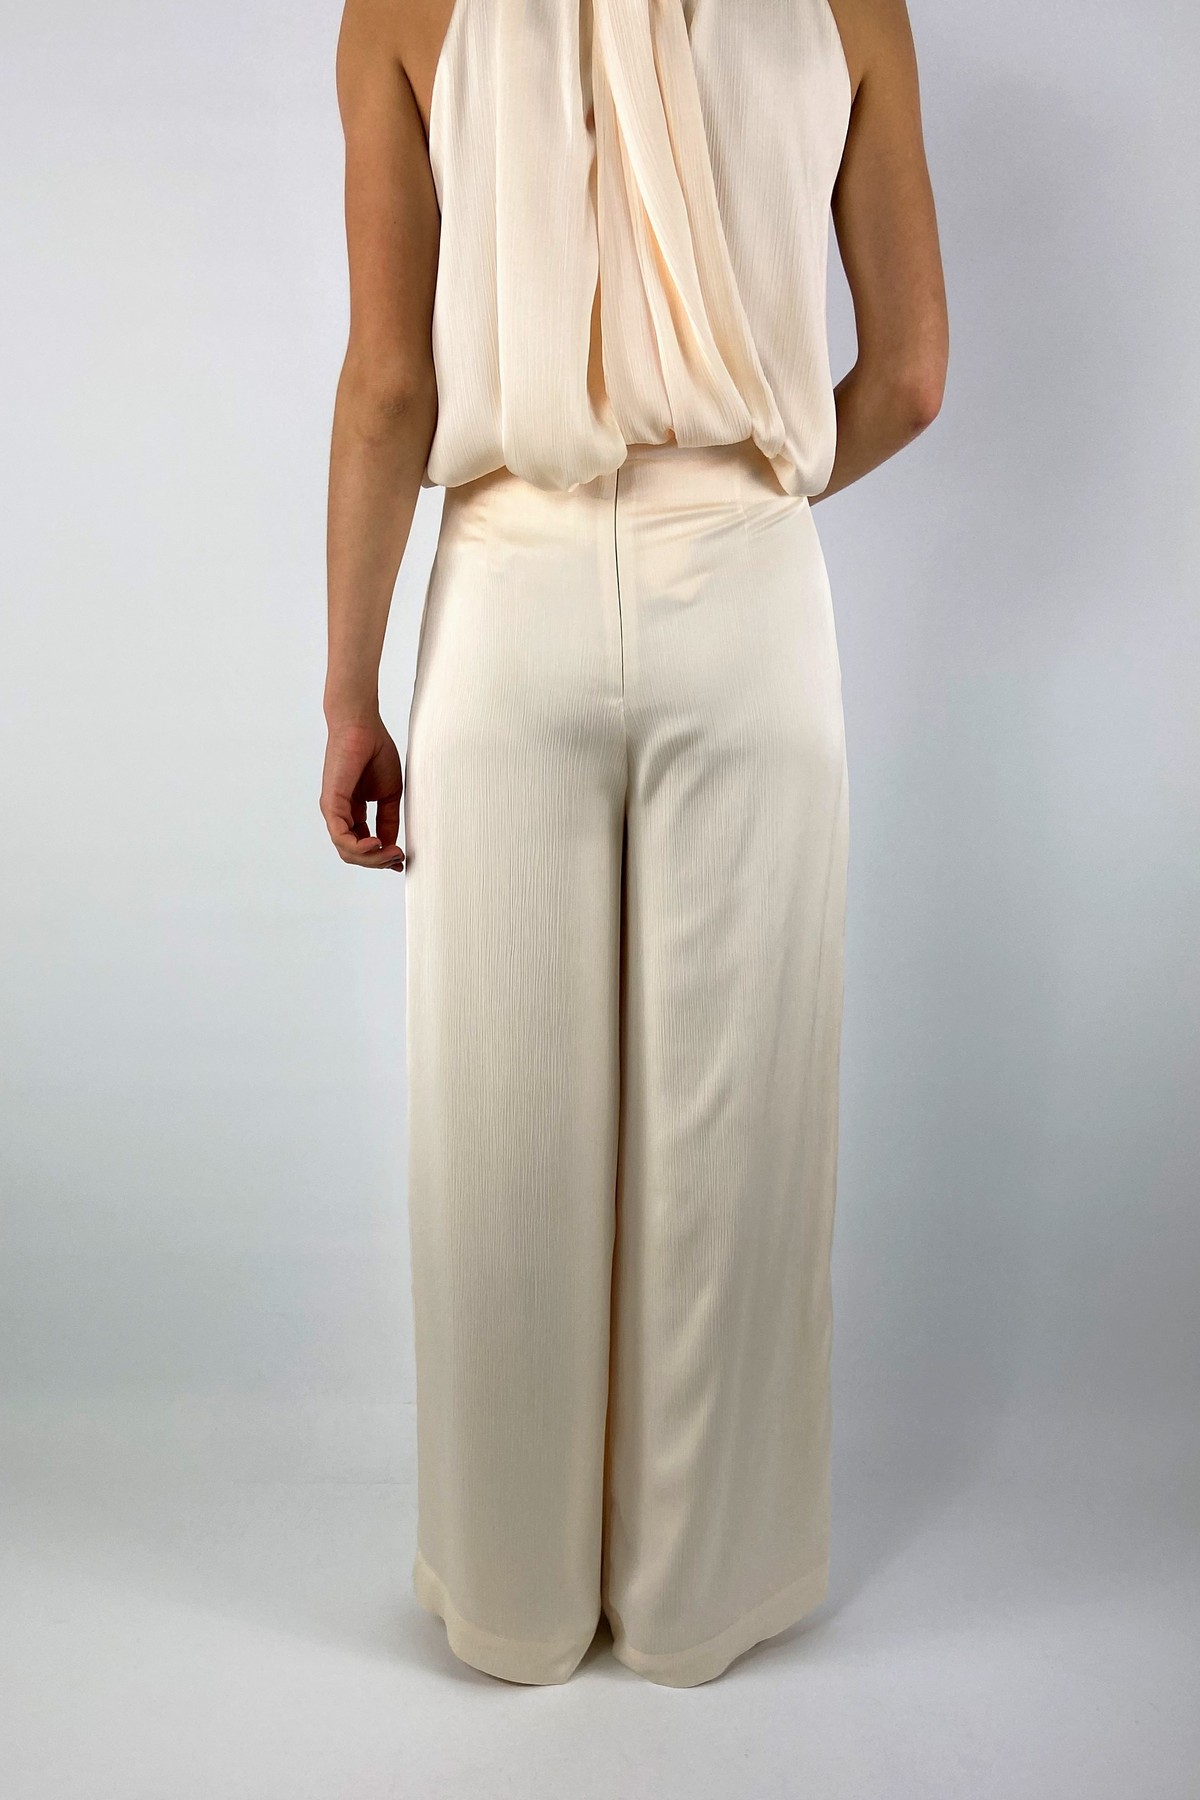 Oscar the collection - Constance Trousers - Broek satin crepe pearl